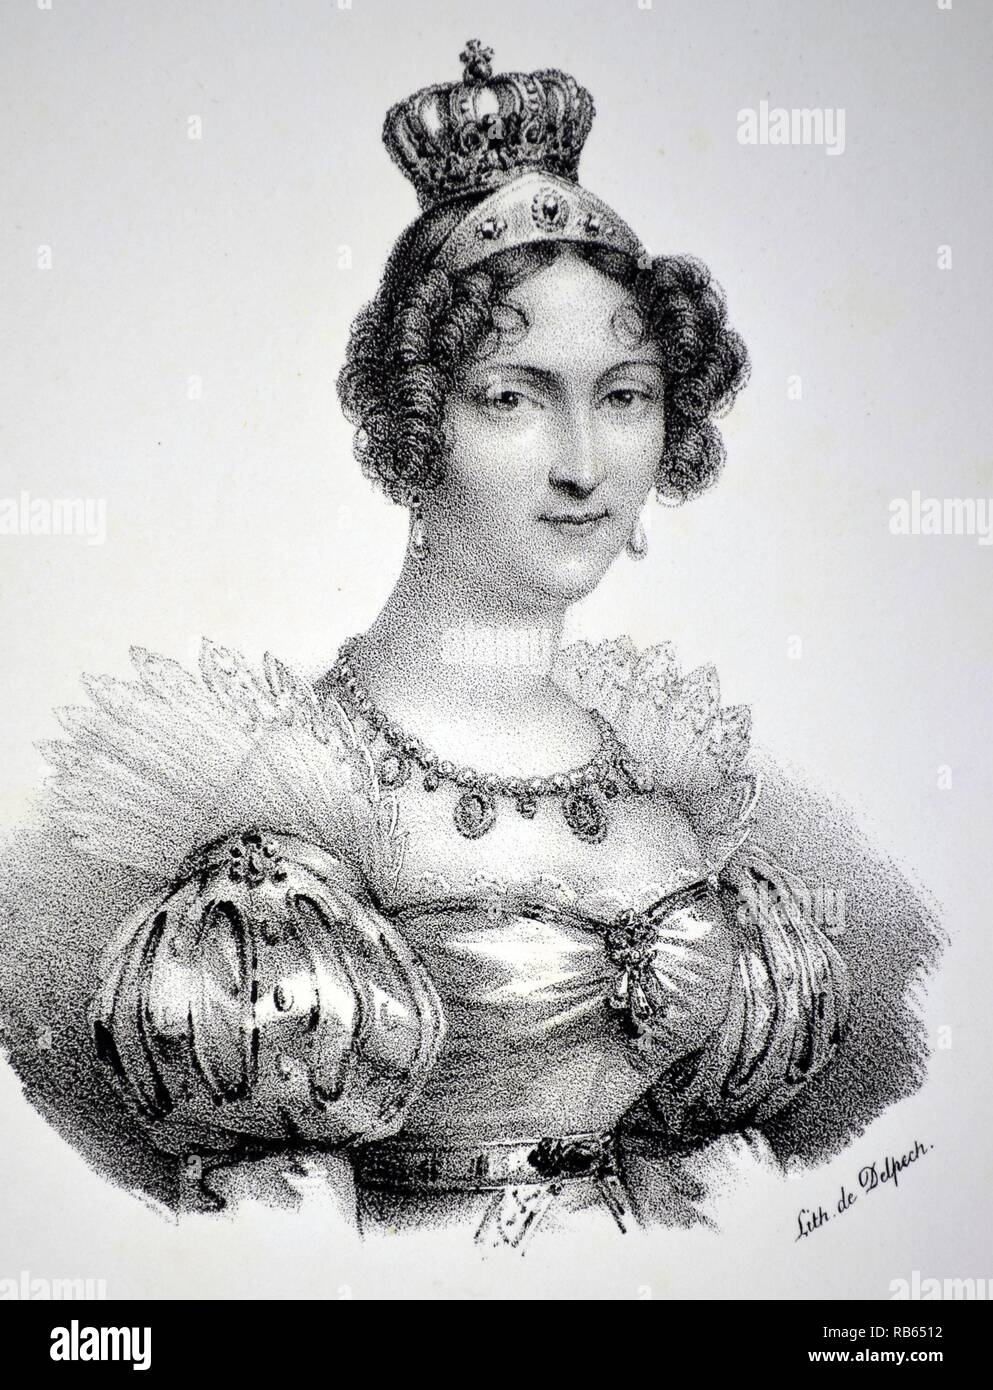 Hortense de Beauharnais (1783-1837) stepdaughter and sister-in-law of Napoleon I. Queen Consort of Holland 1806-1810. Mother of Napoleon III. Lithograph, Paris, 1832 Stock Photo